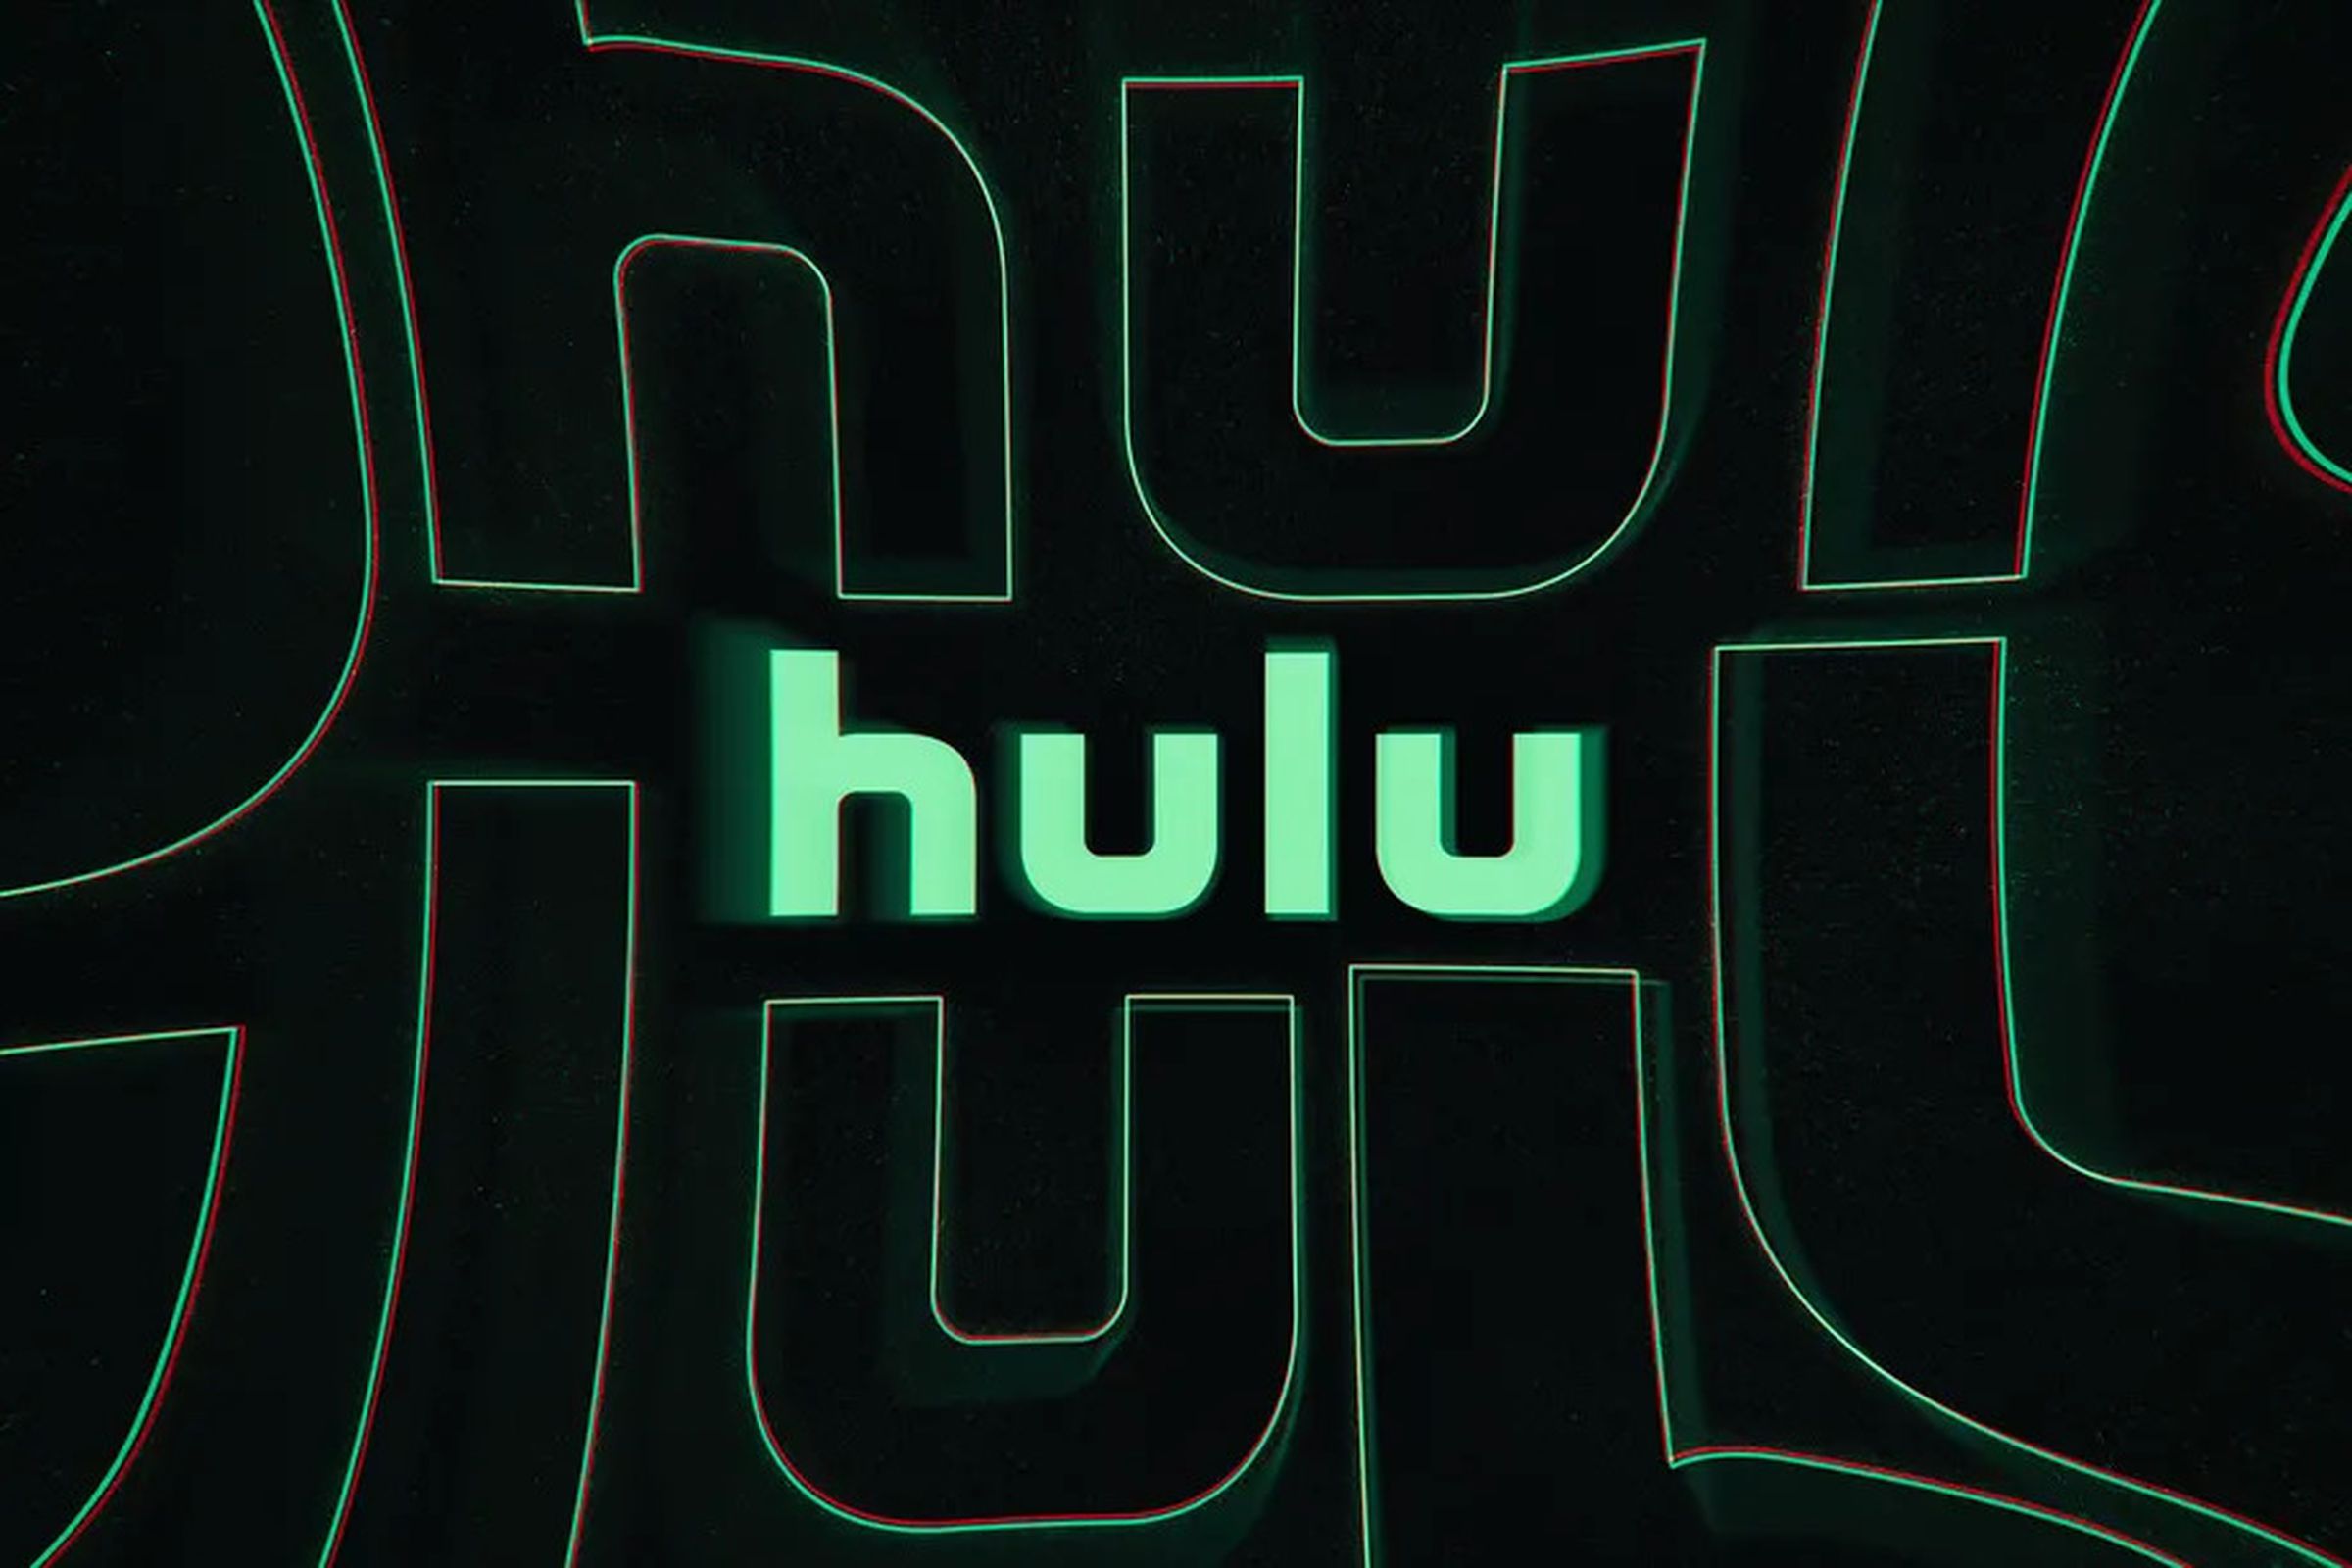 Hulu is “celebrating” National Streaming Day.